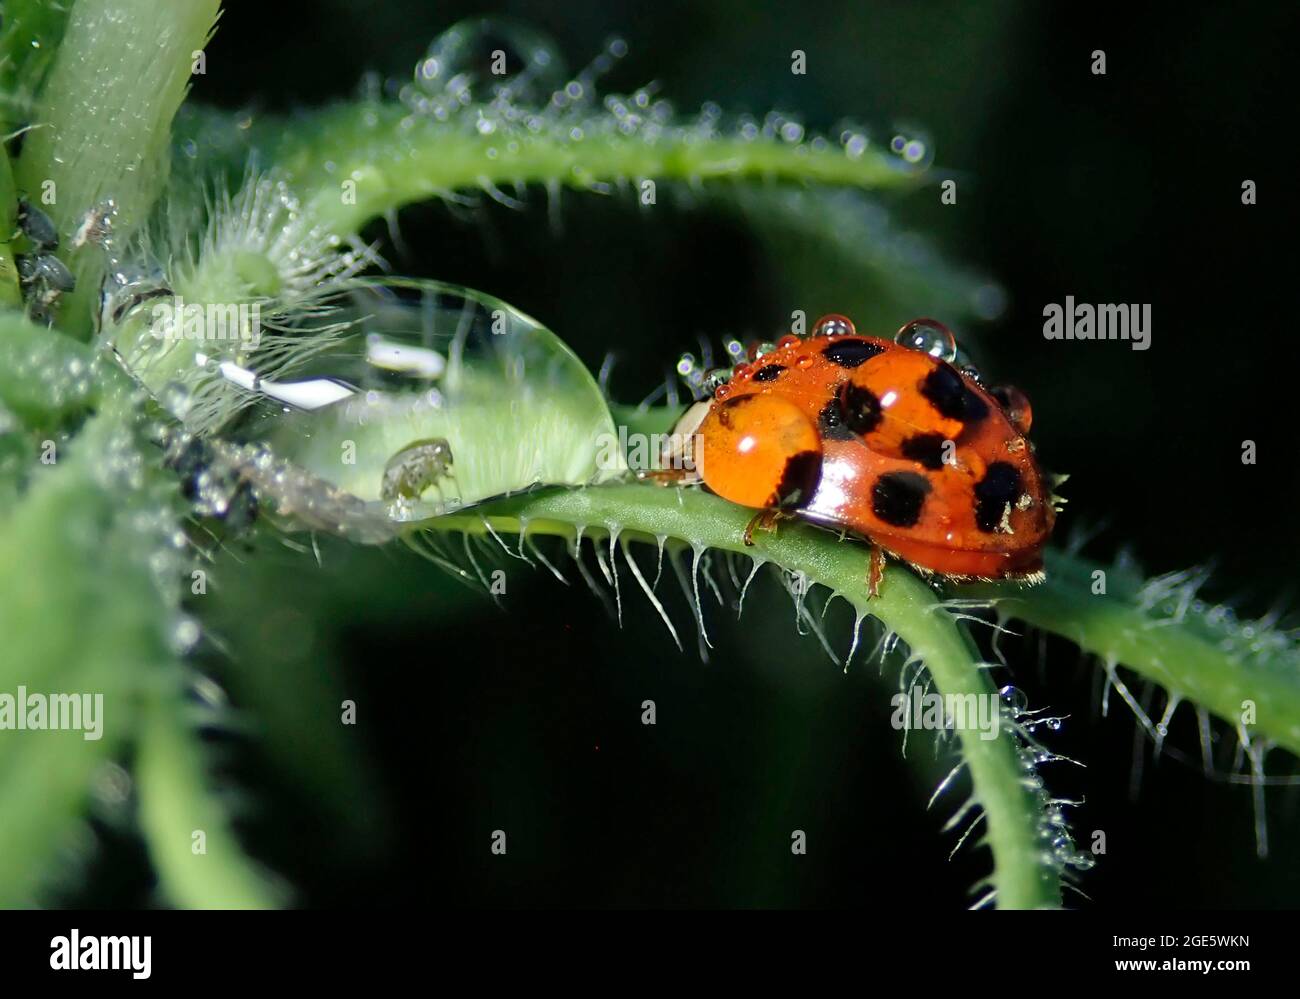 Asian lady beetle (Harmonia axyridis), beneficial insect, aphid, sits on a plant, wet, raindrops, invasive species, Germany Stock Photo